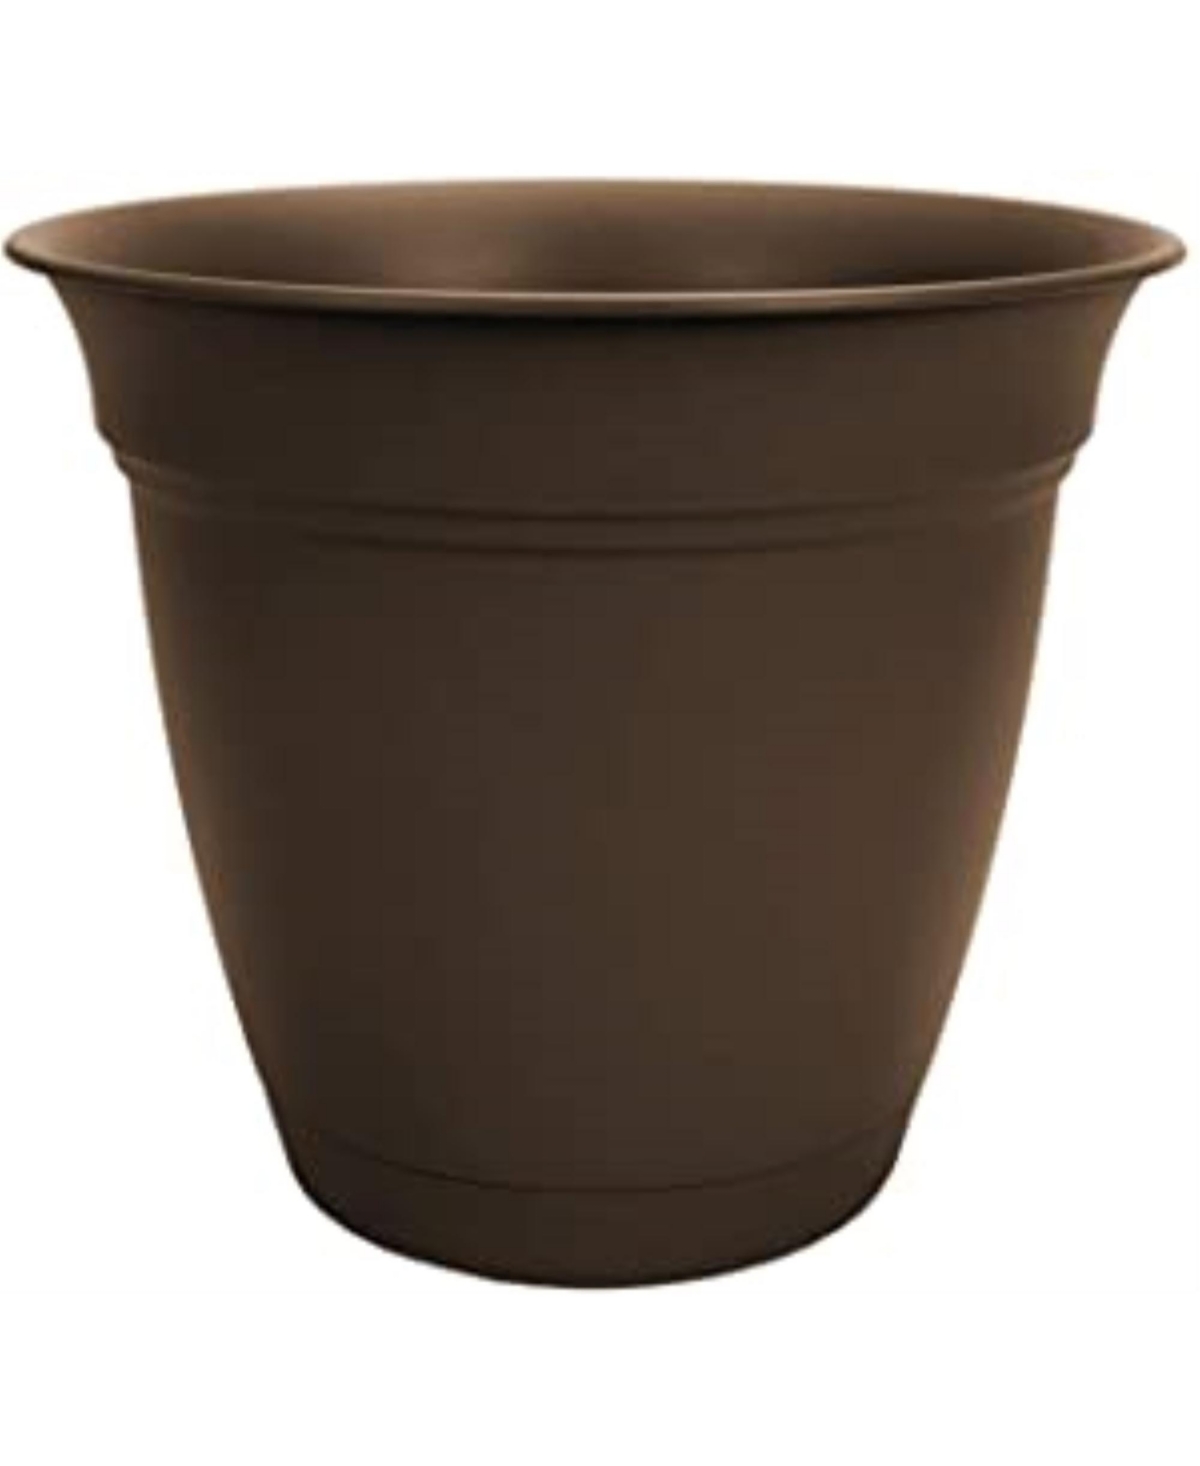 Hc Companies Eclipse Round In Outdoor Plastic Planter Chocolate 12in - Brown